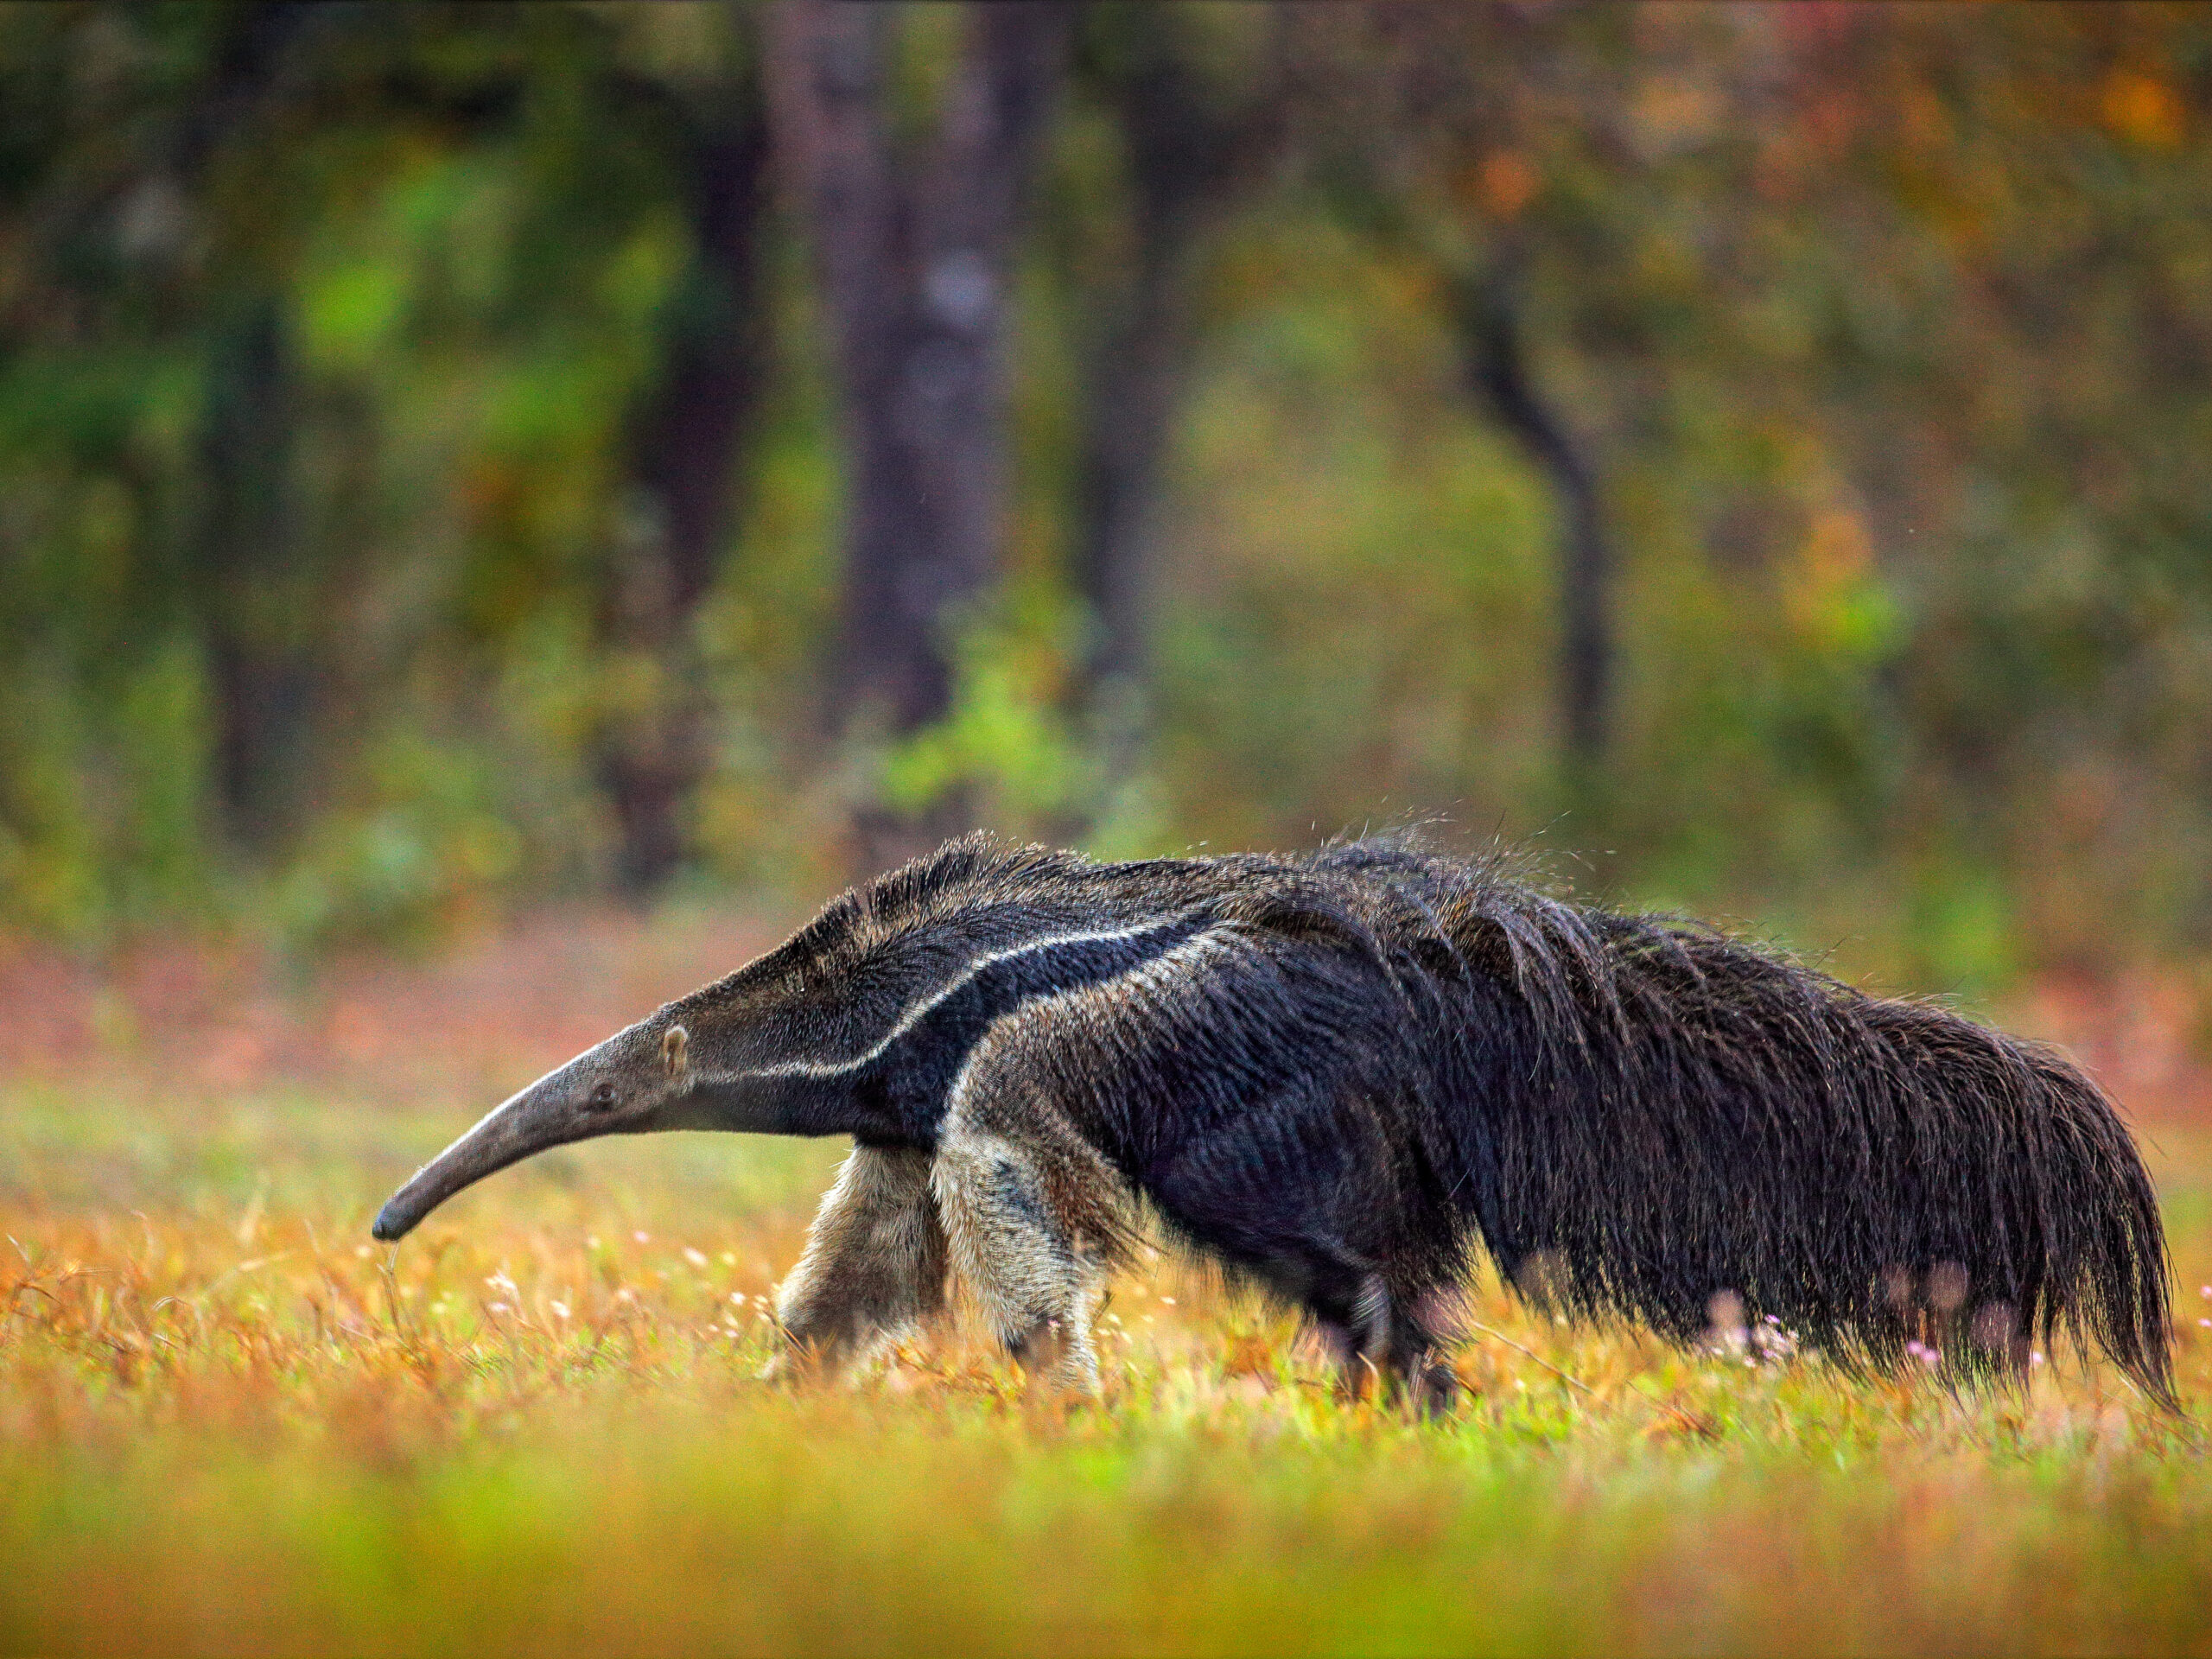 Giant Anteater from the Pnatanal